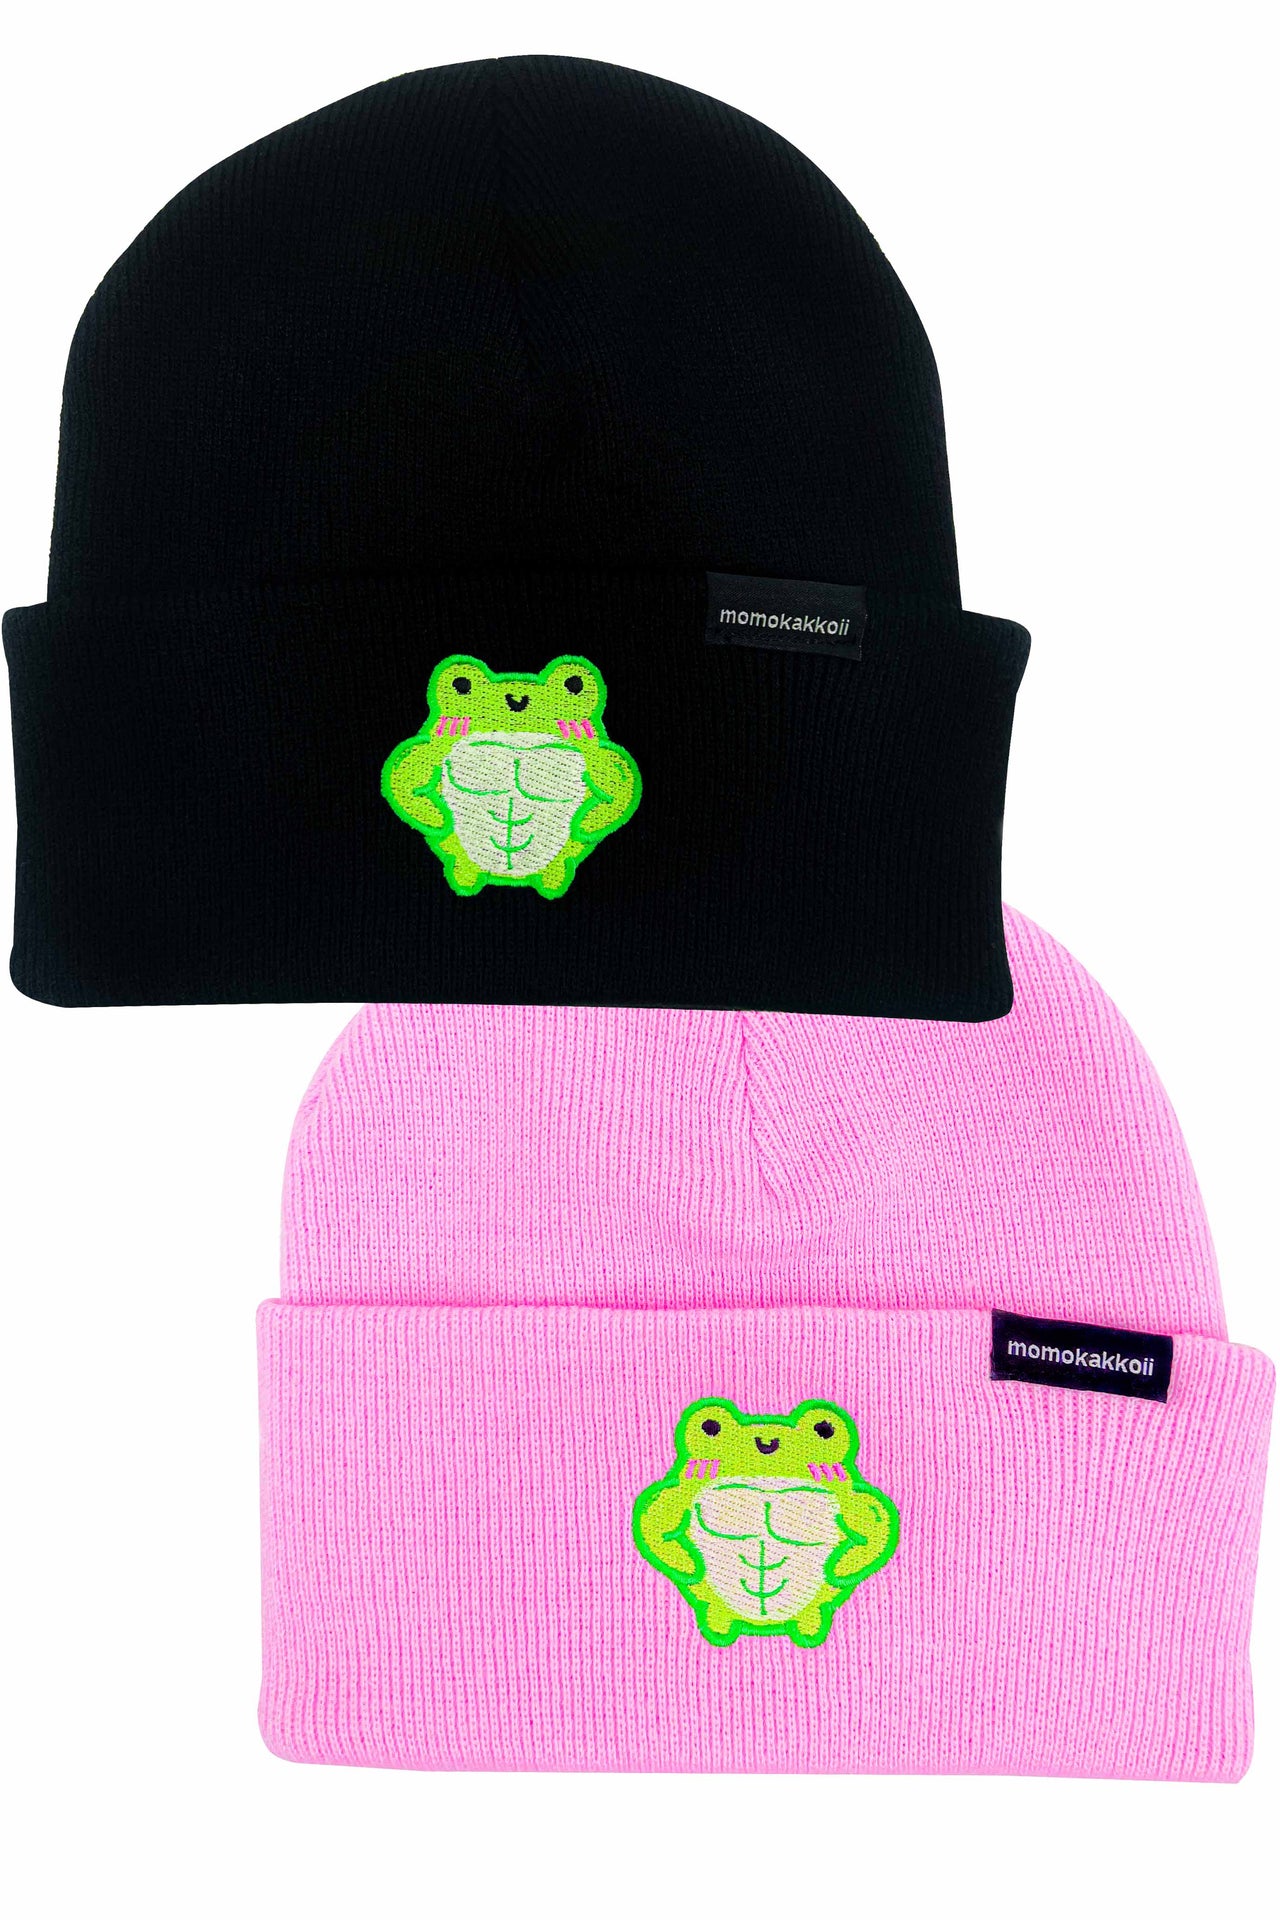 Mighty Albert Embroidered Beanie